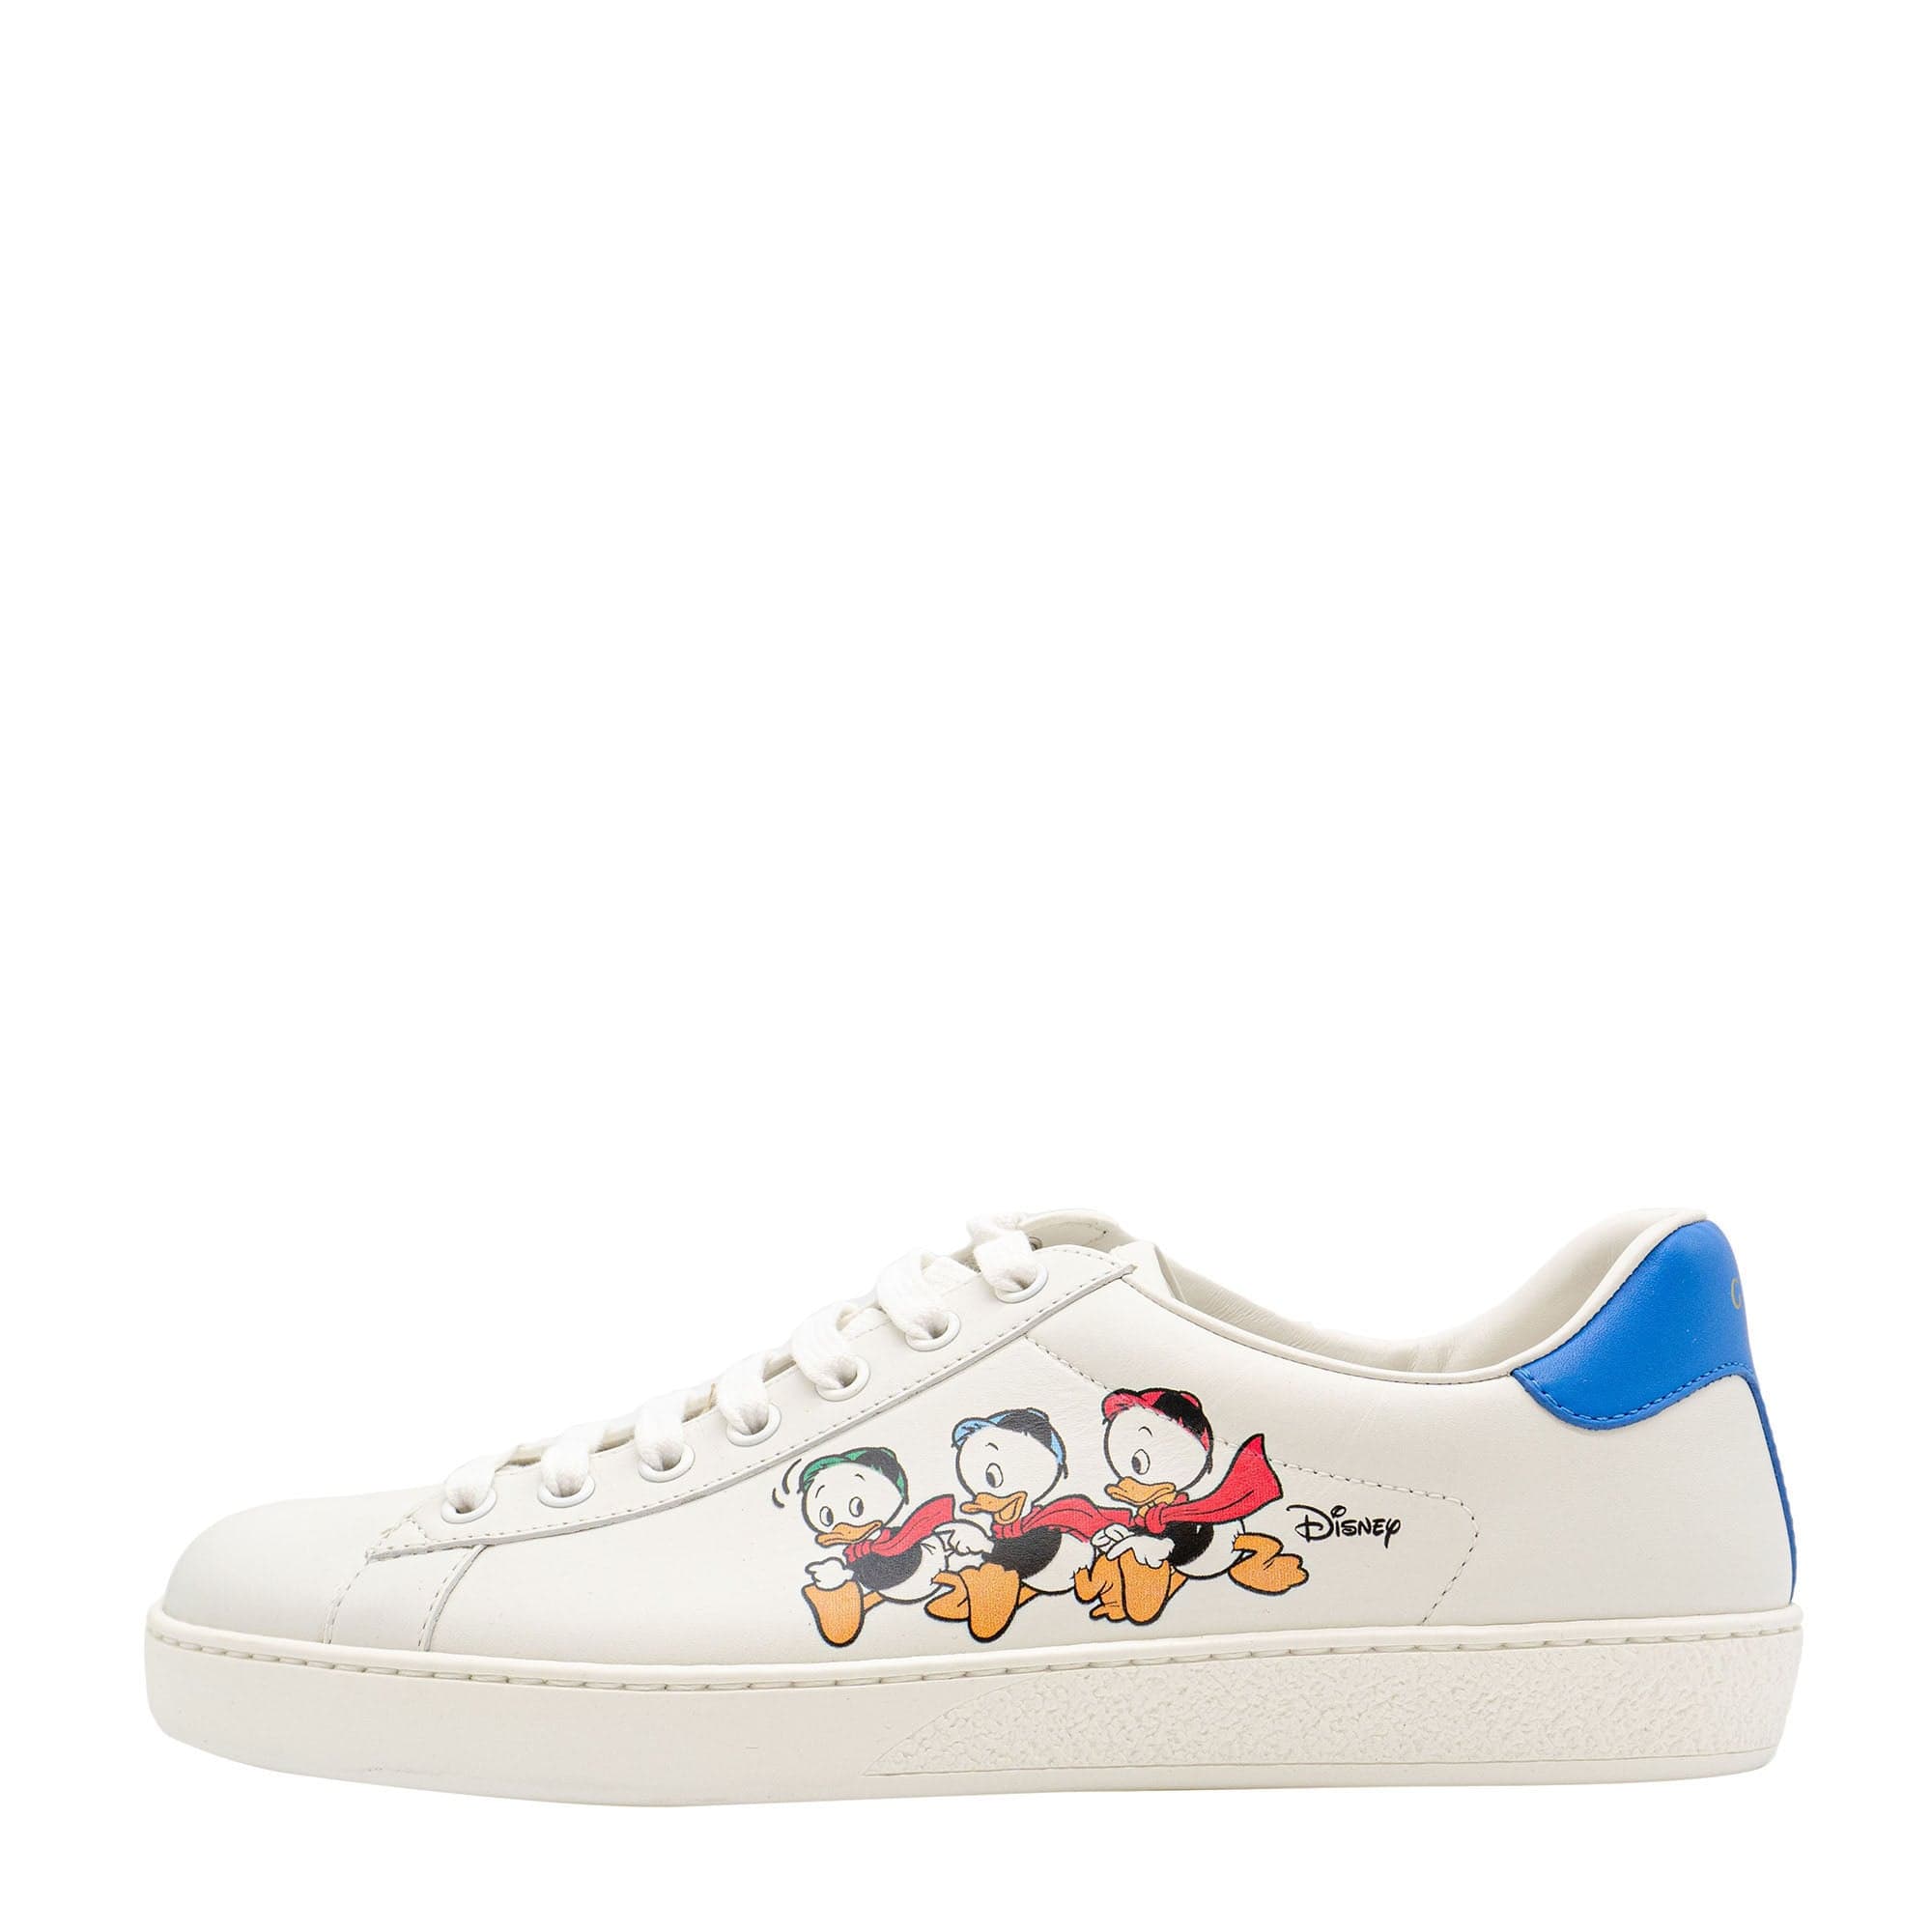 Gucci Gucci x Disney Donald Duck New Ace Leather Low-Top Trainers 7 SYCH056